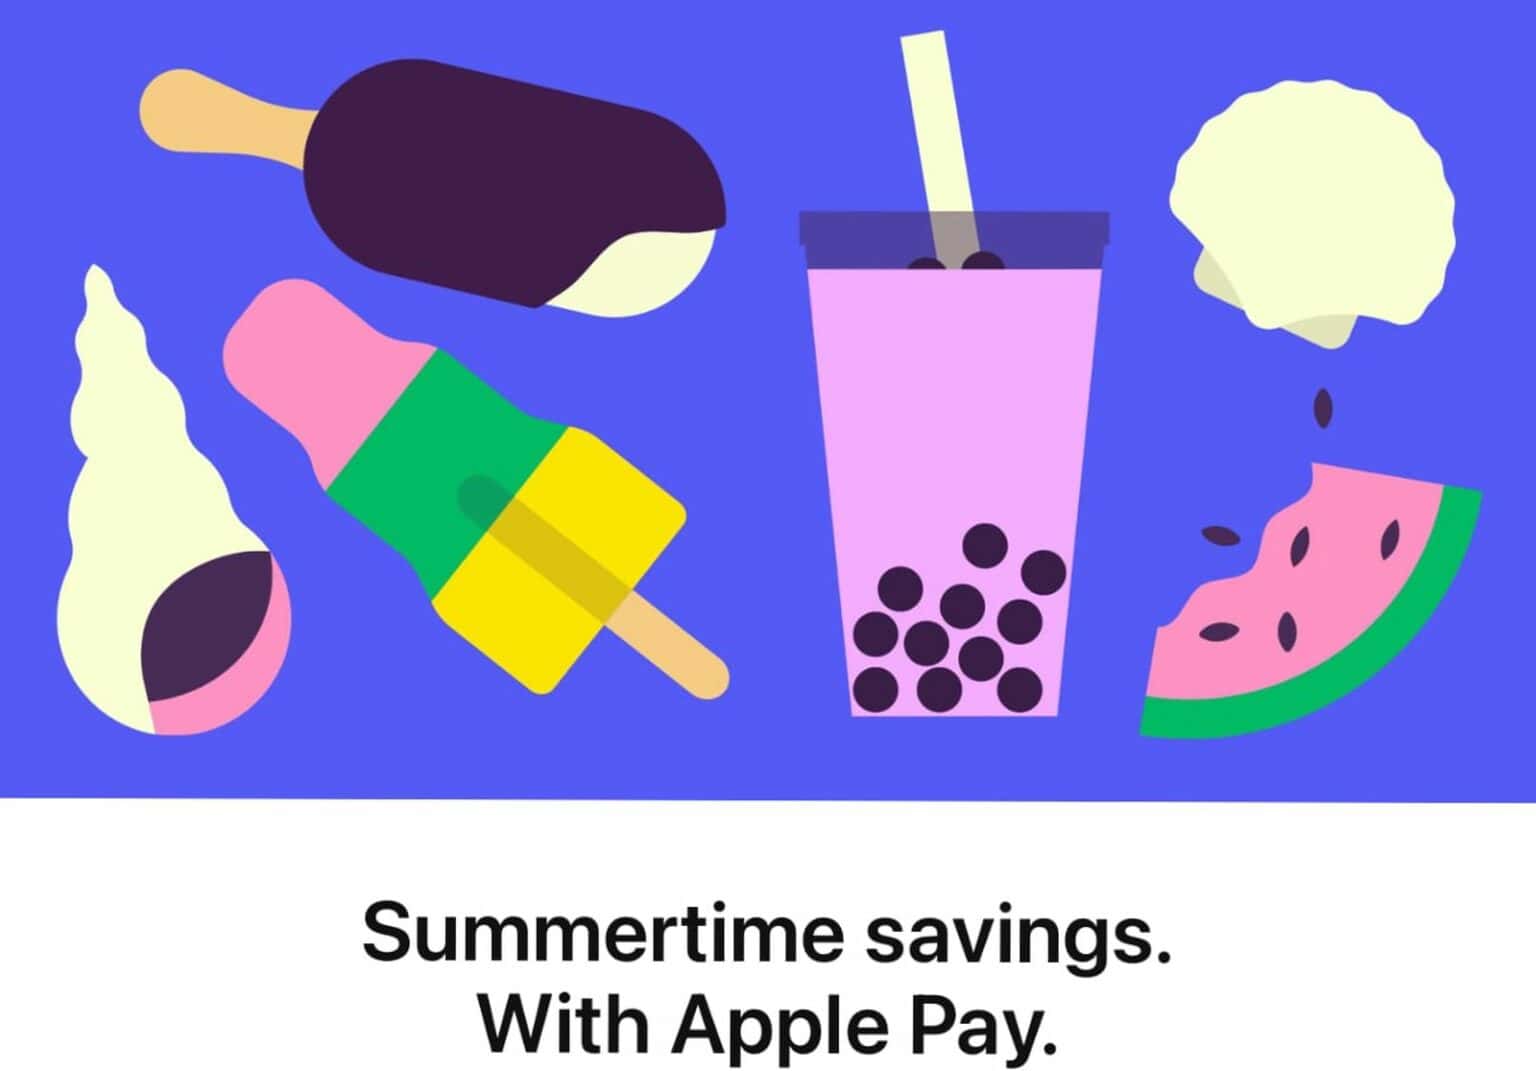 Apple Pay fun in the summertime: Get big discount from 13 retailers.